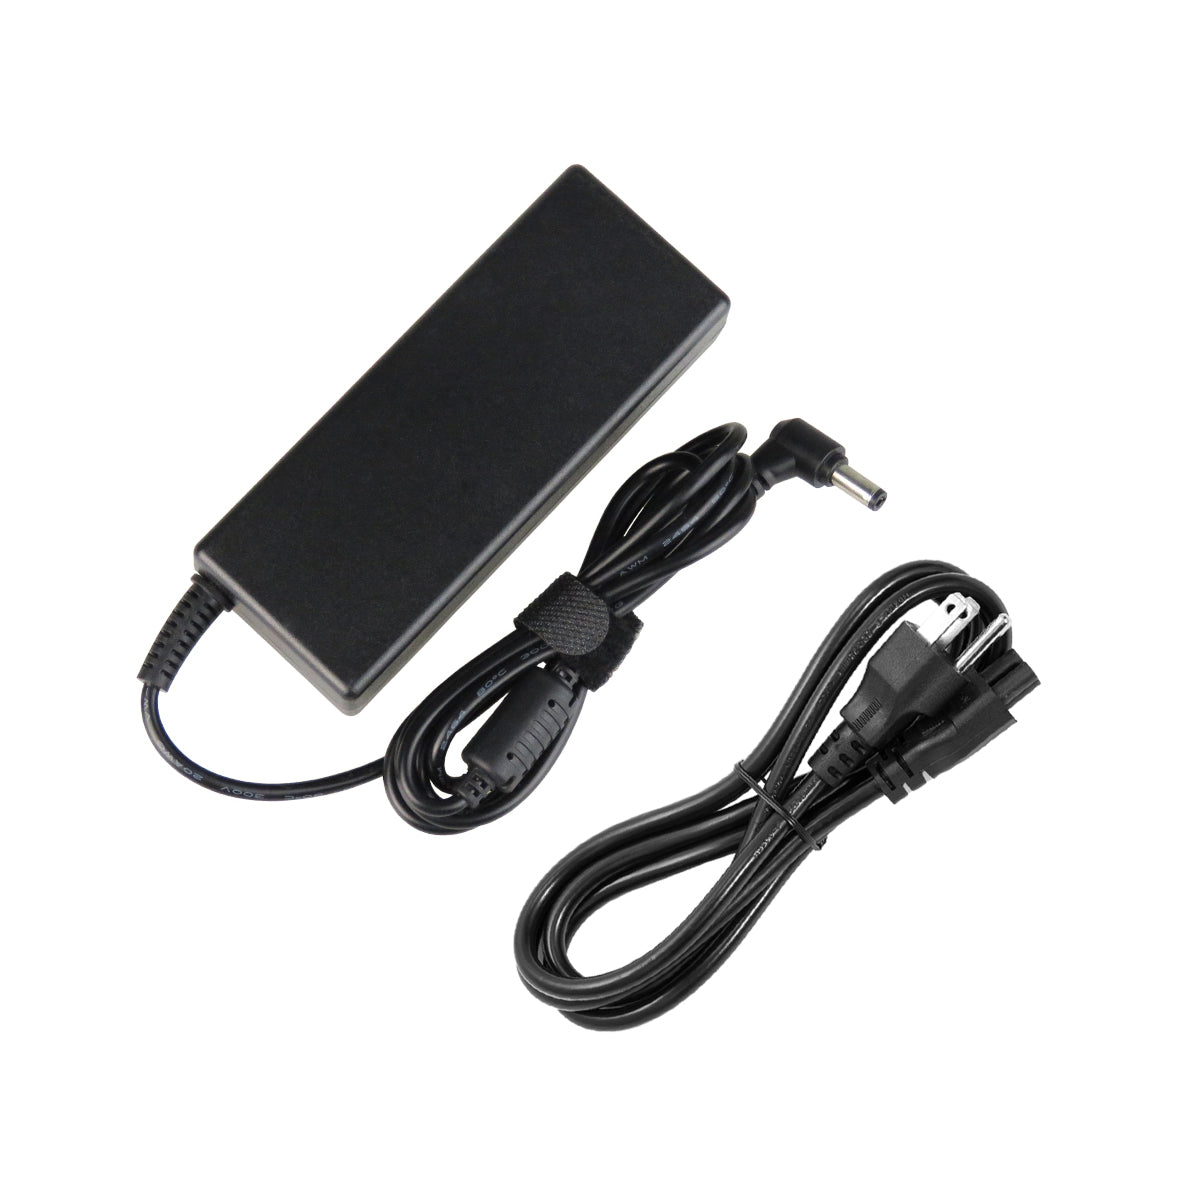 AC Adapter Charger for ASUS N73SV Notebook.